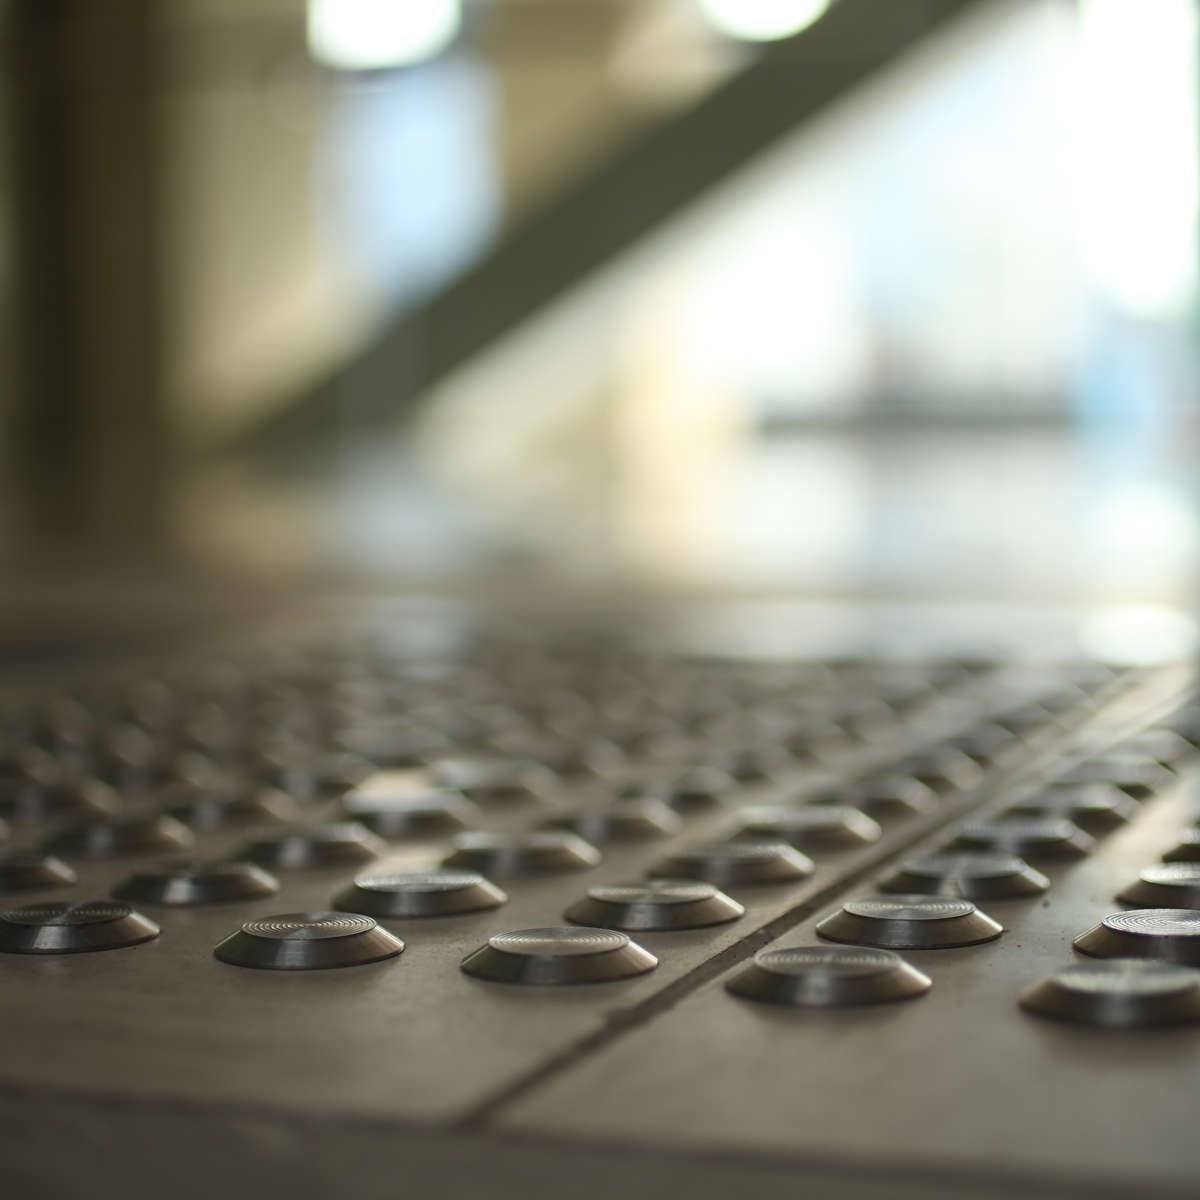 Close-up of TacPro stainless steel tactile indicators installed on tiles